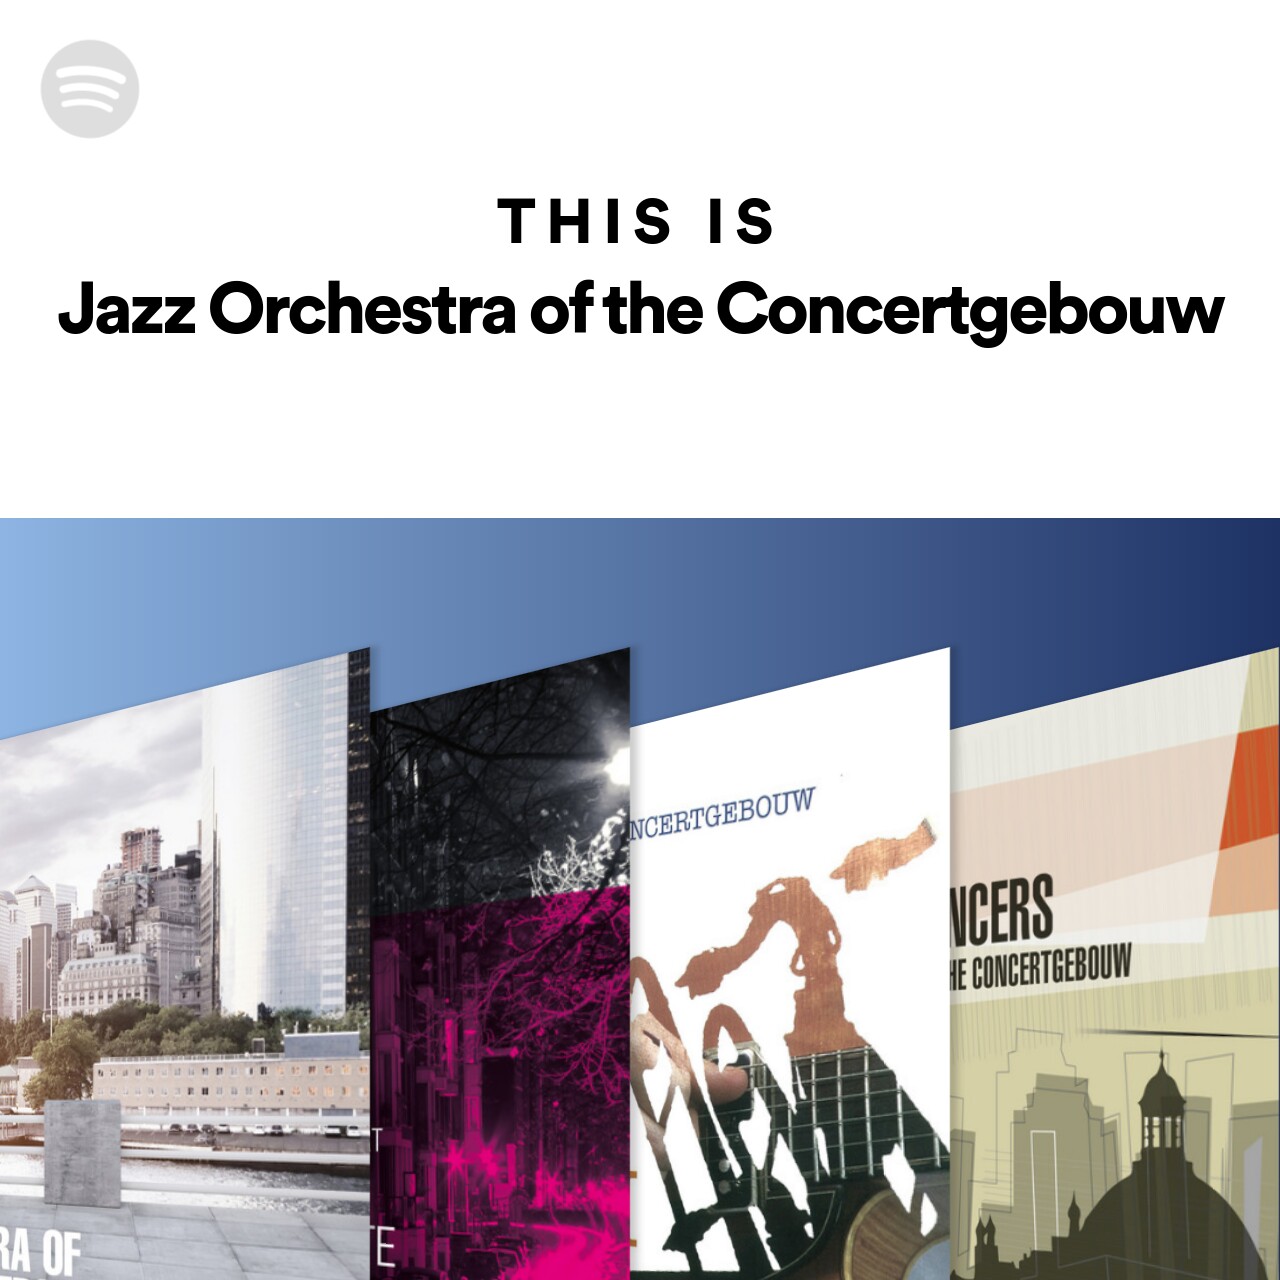 This is Jazz Orchestra of the Concertgebouw